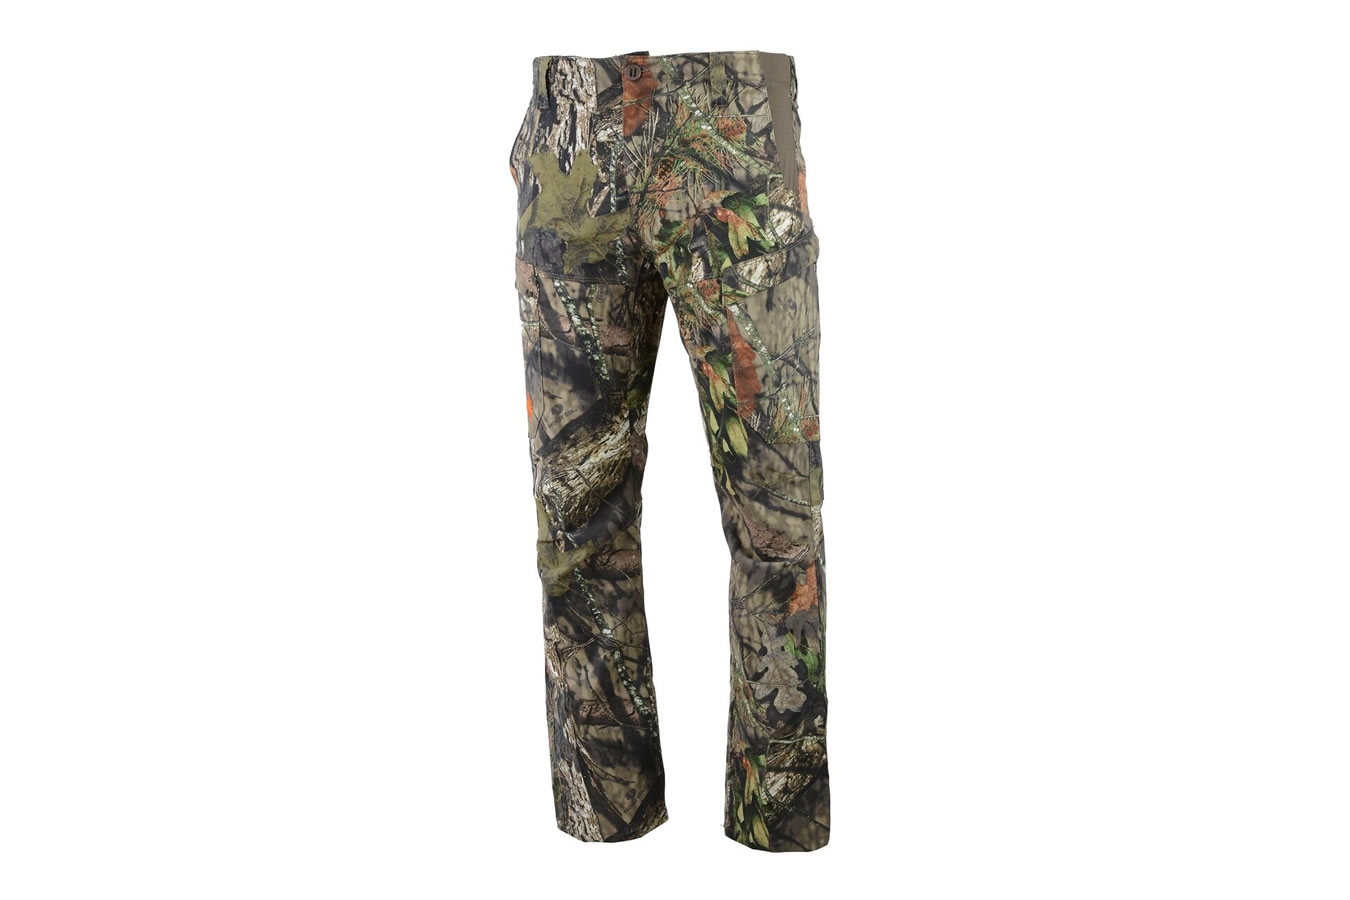 Nomad Camo Bloodtrail Pant | Vance Outdoors